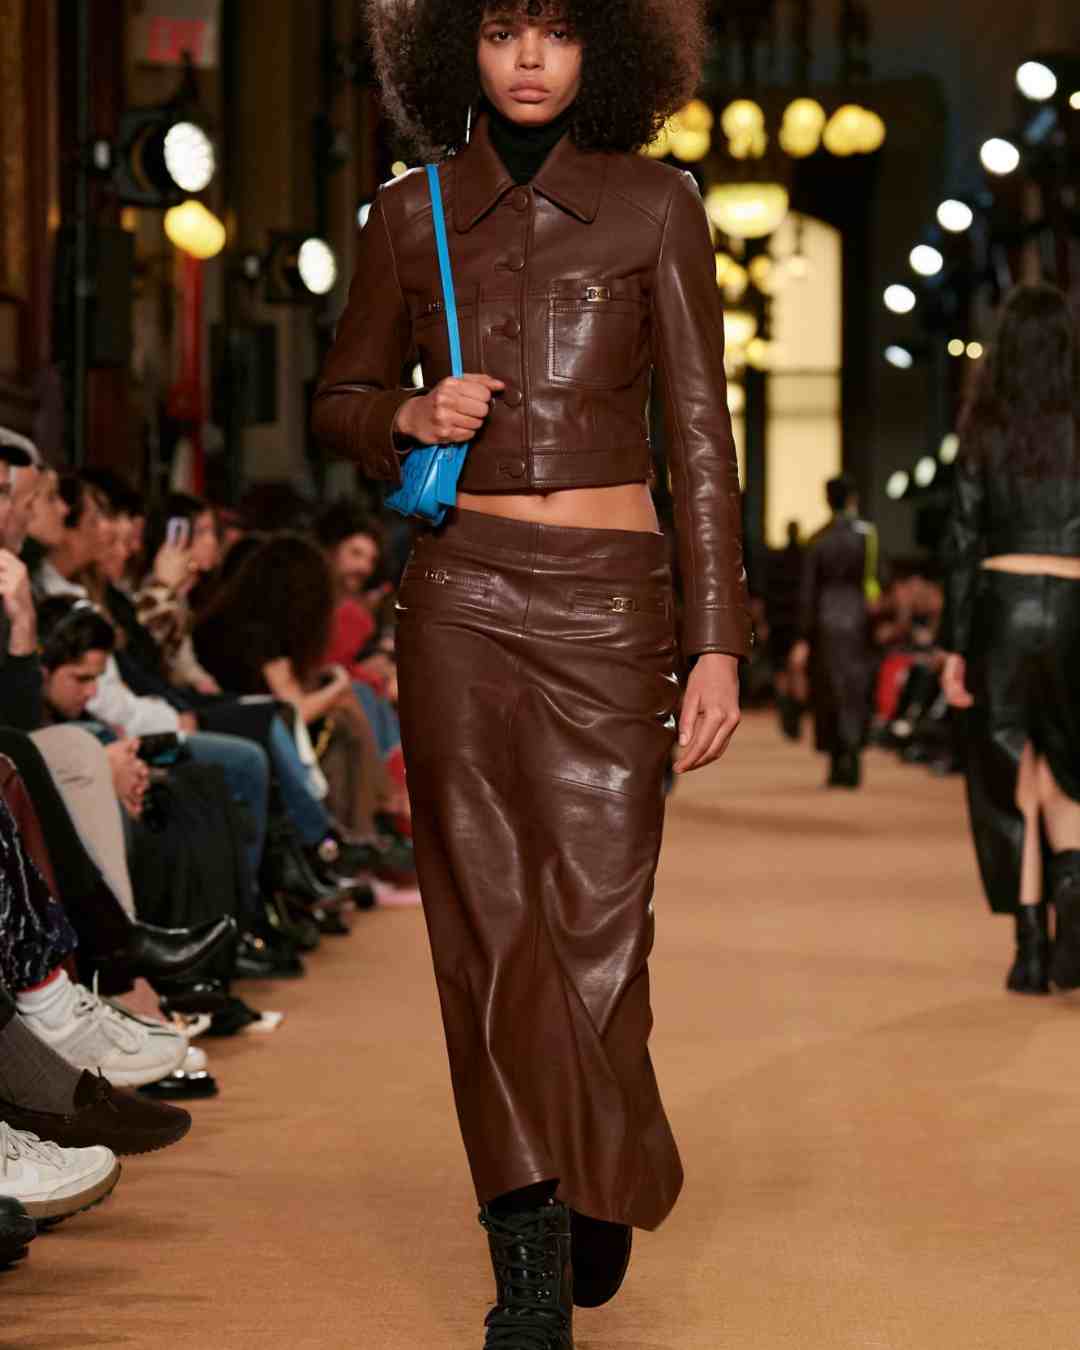 Women wears cholcolate brown leather jacket buttoned up and cropped at the waist and a leather maxi skirt in the same colour with boots and carries and aqua blue small bag over the shoulder